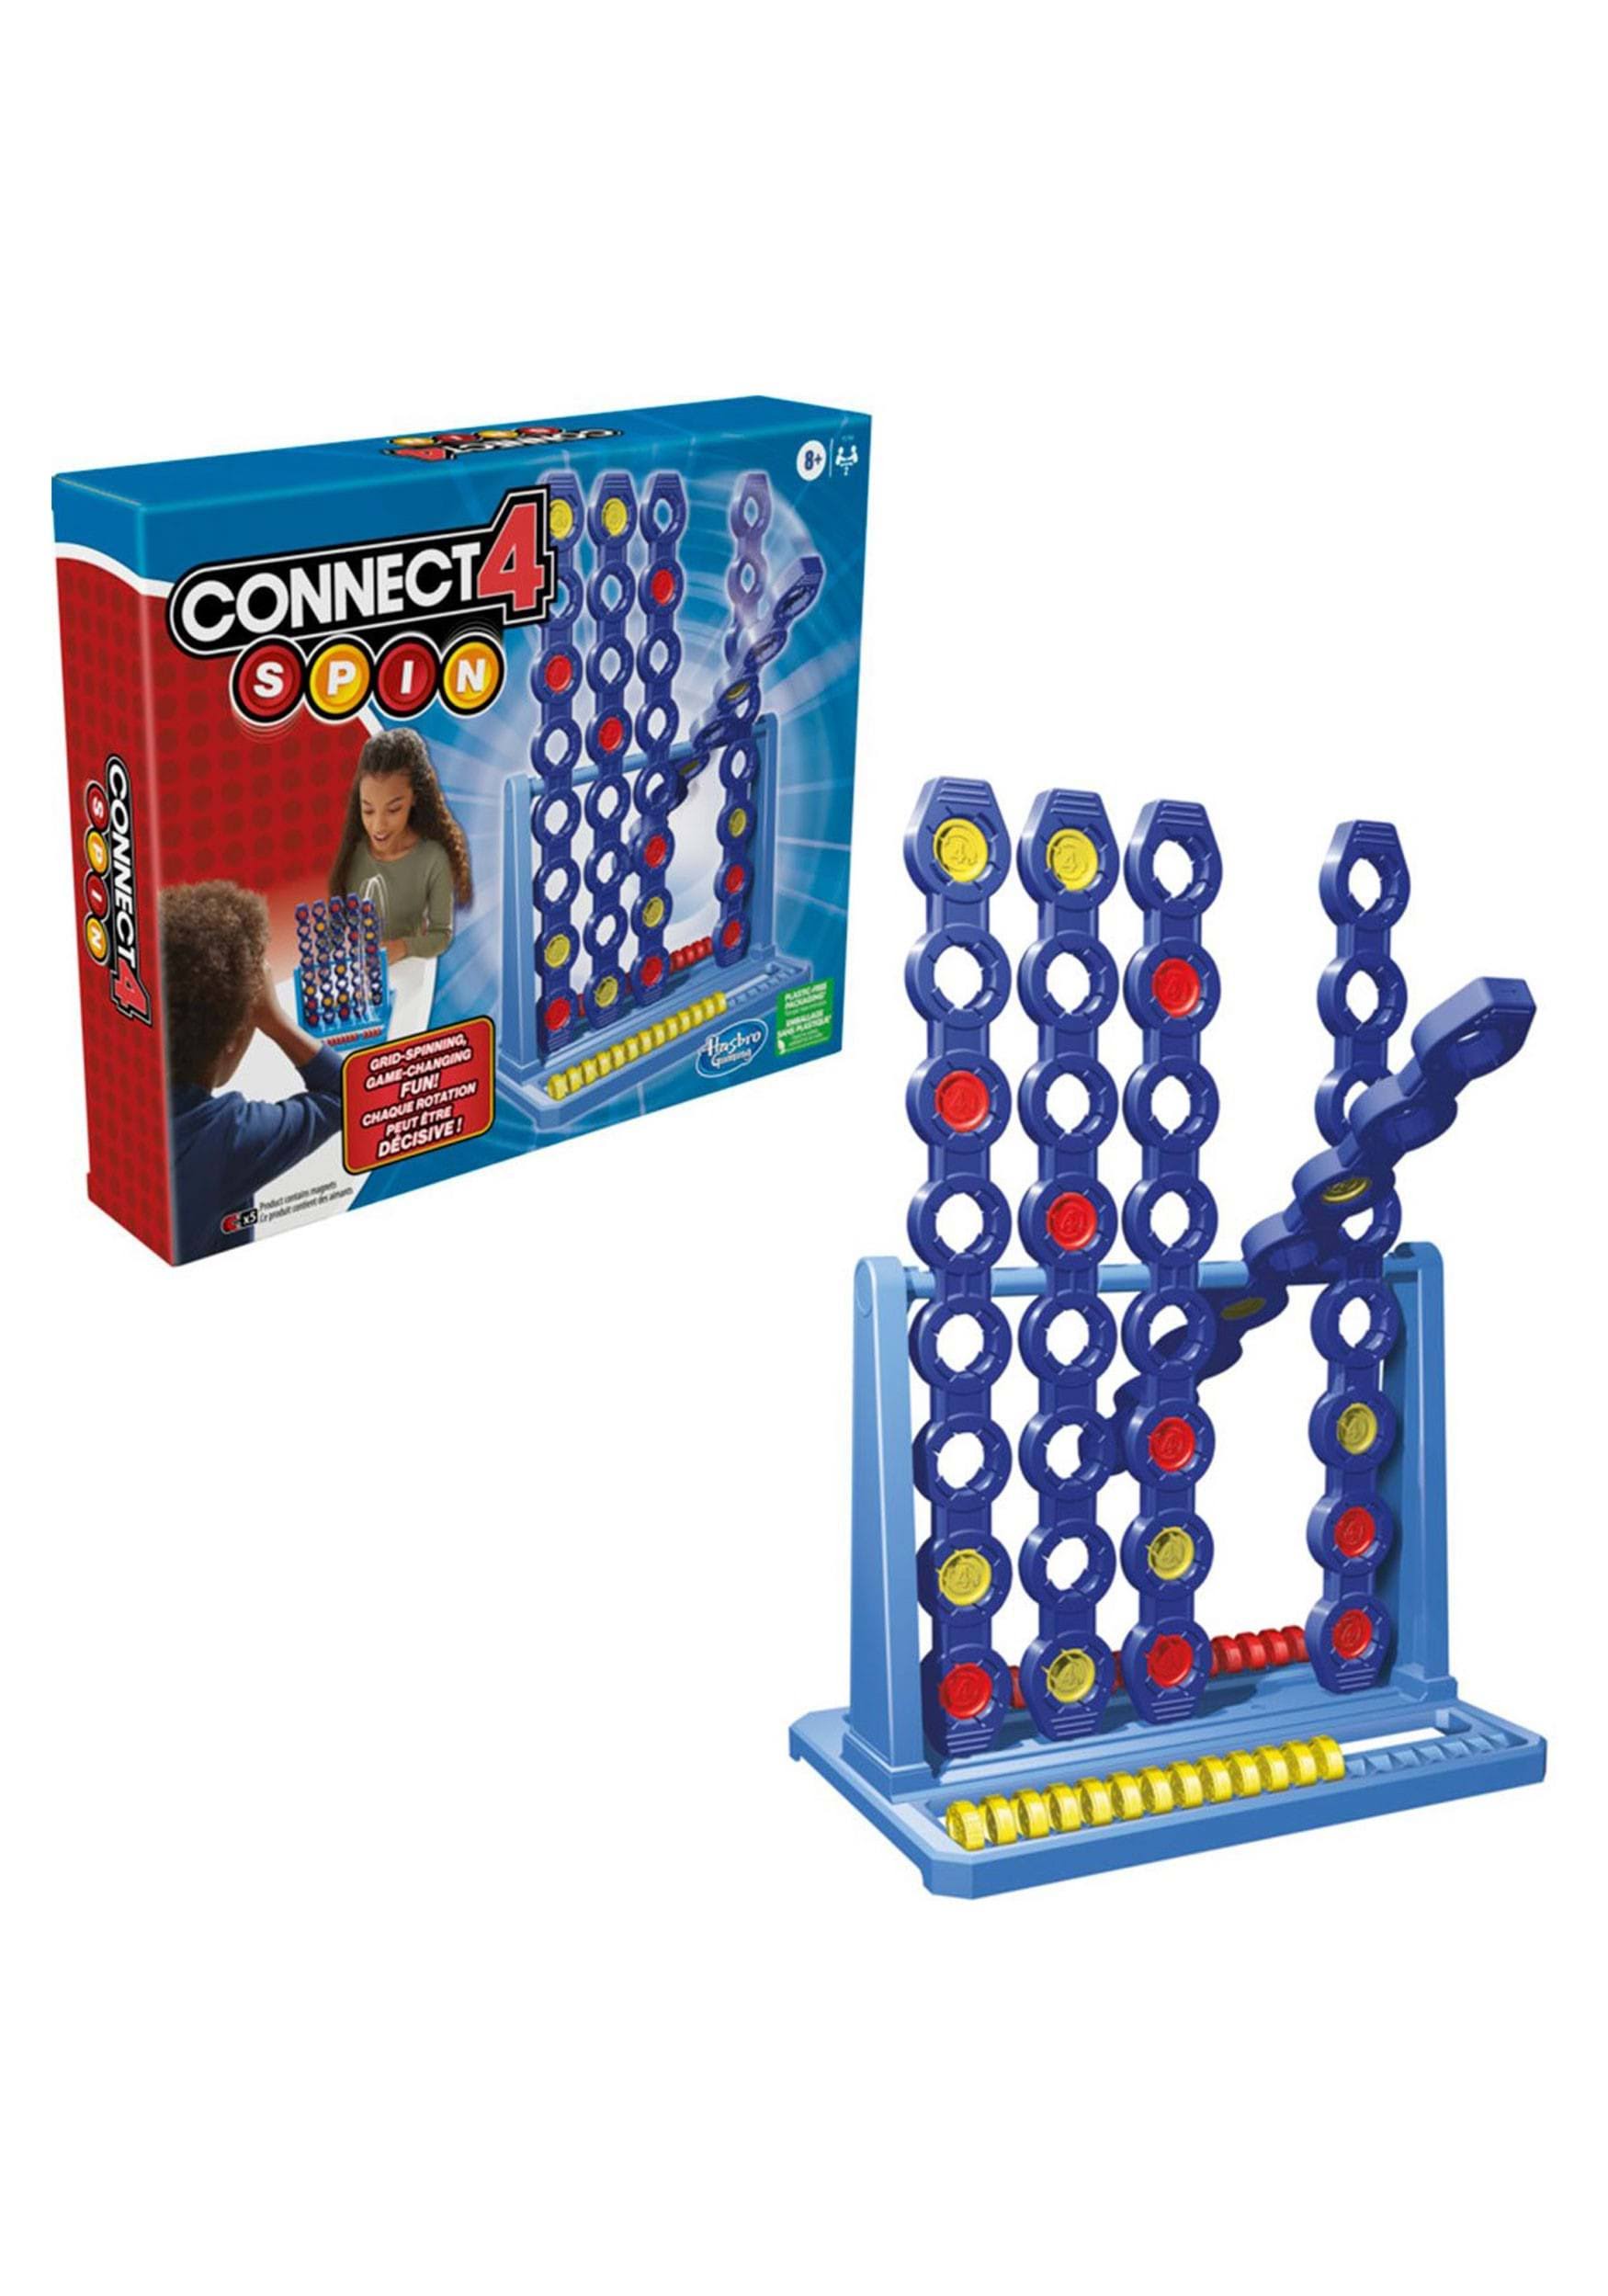 Connect 4 Spin Game, Features Spinning Connect 4 Grid, 2 Player Board Games For Family And Kids, Strategy Board Games, Ages 8 And Up Hasbro